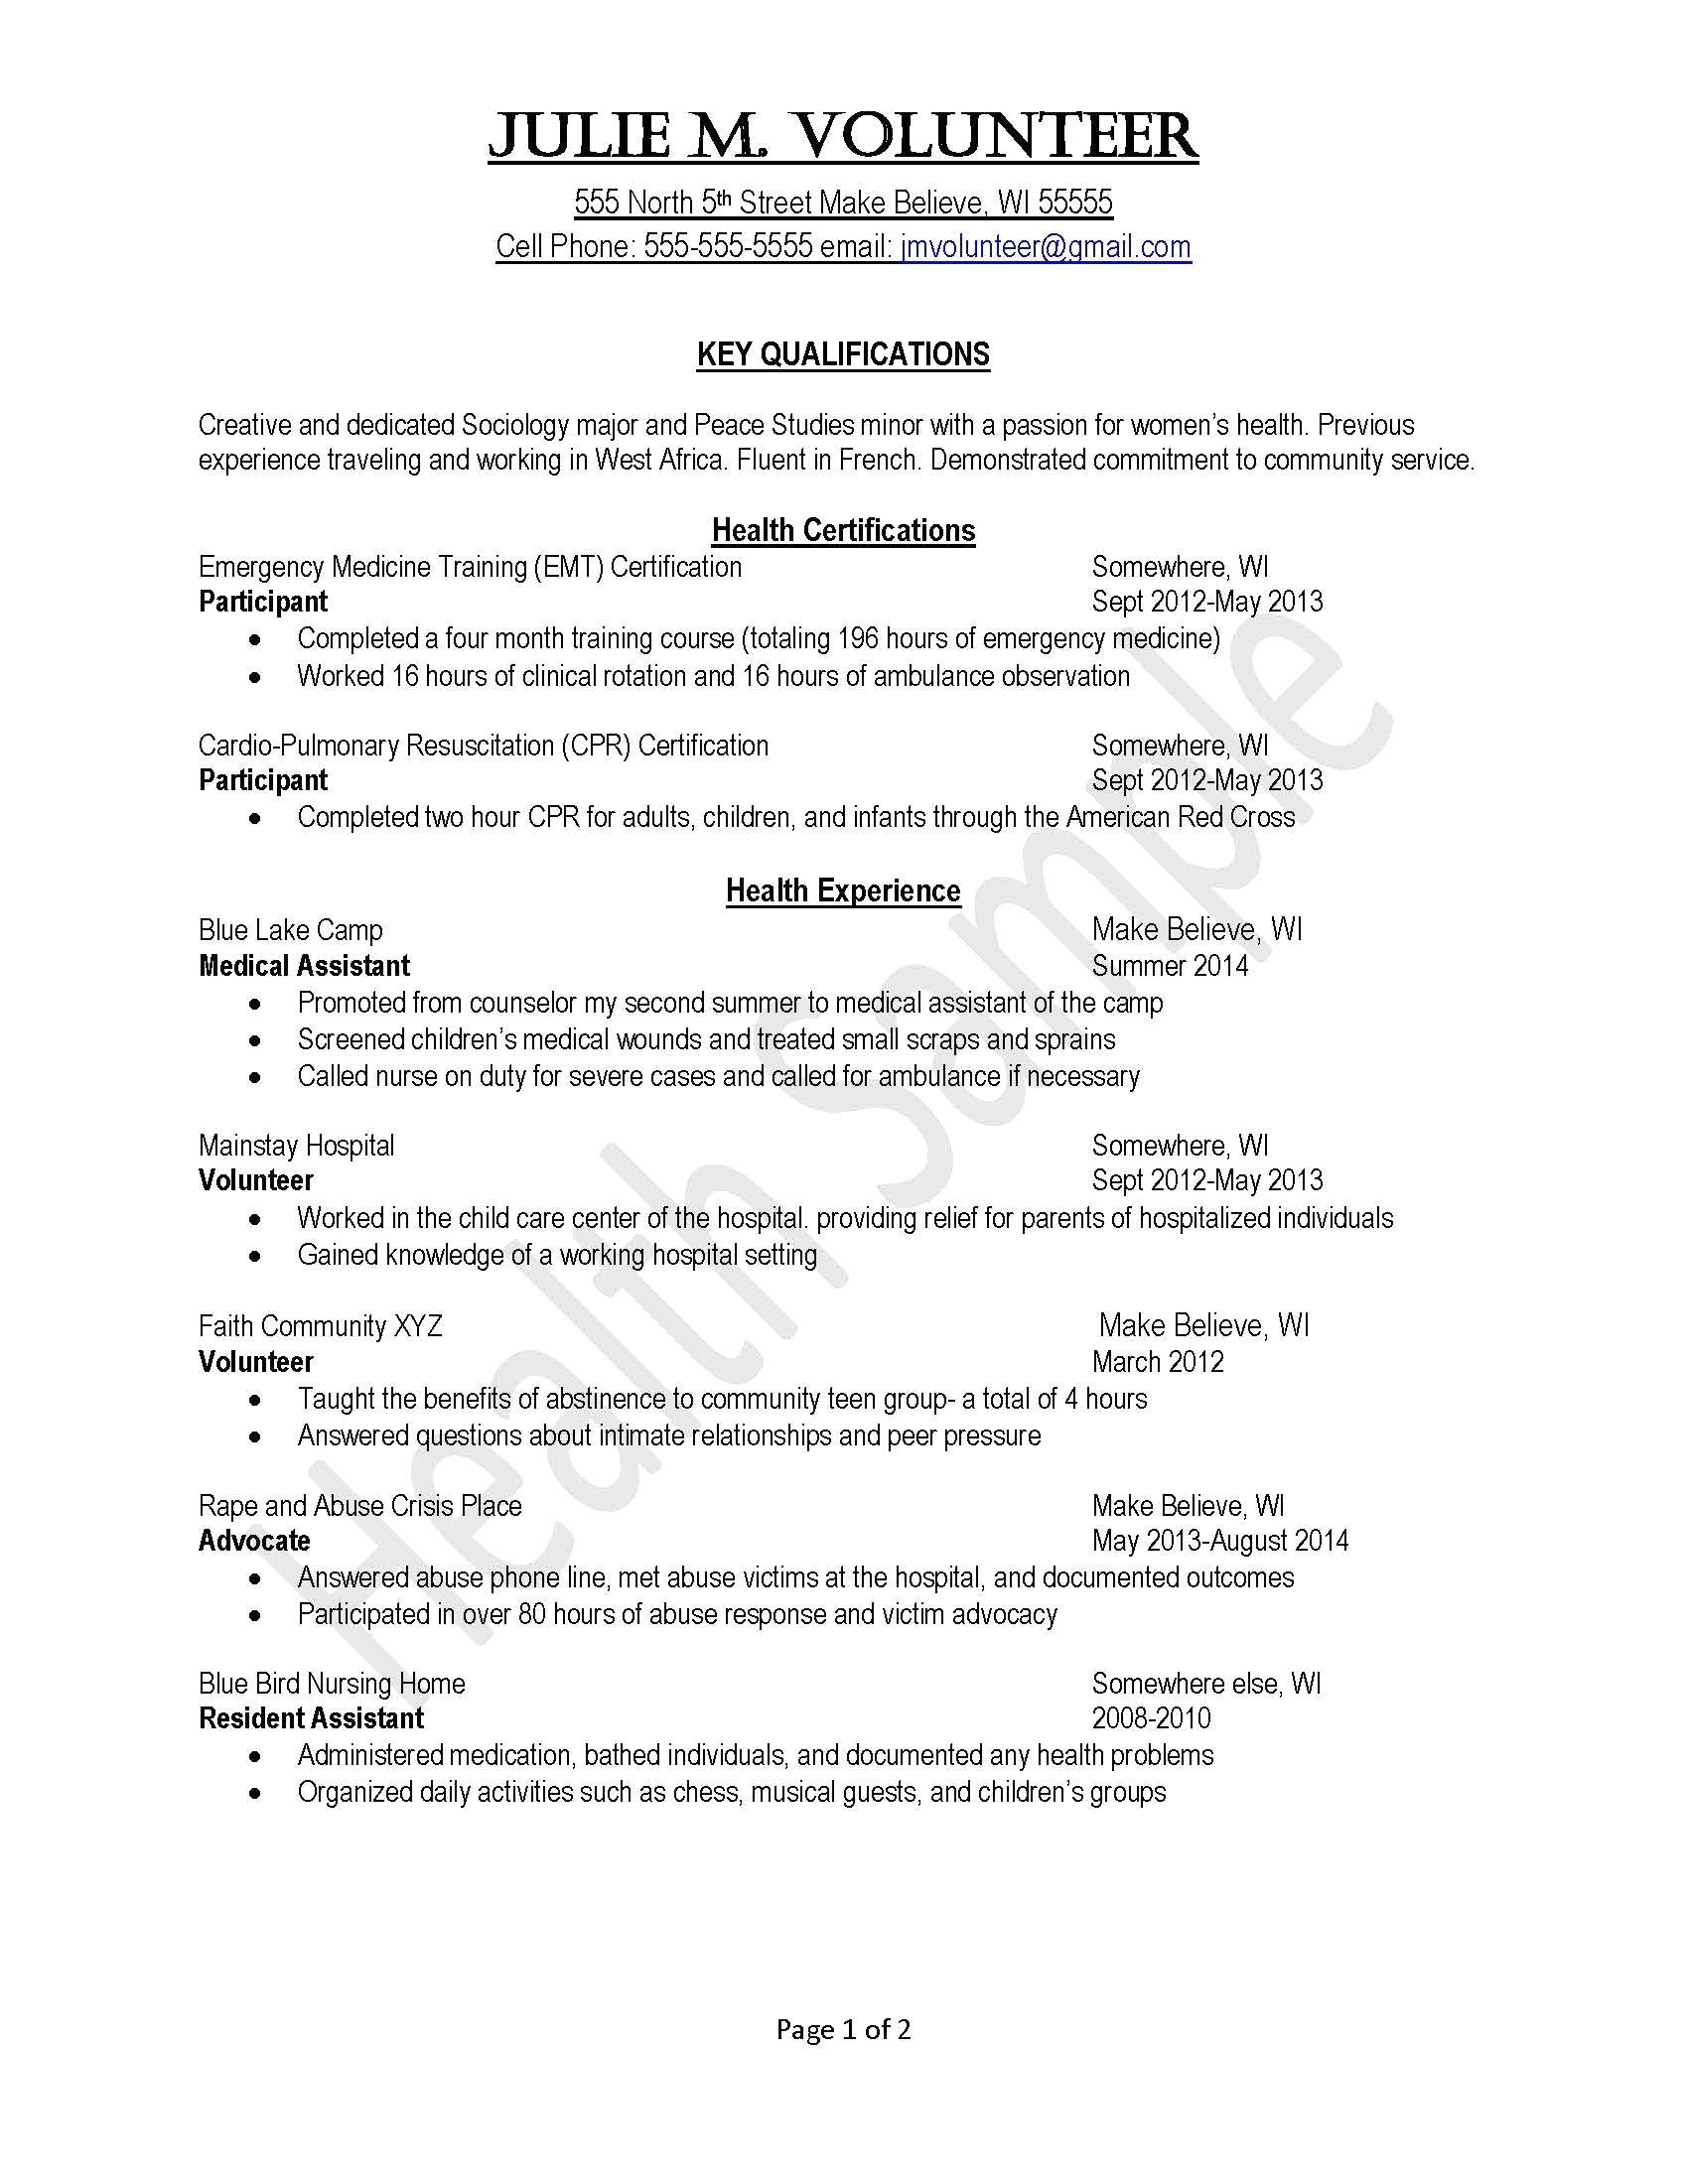 Resume Templates for sociology Majors Trending Images Of Modeling Resume No Experience